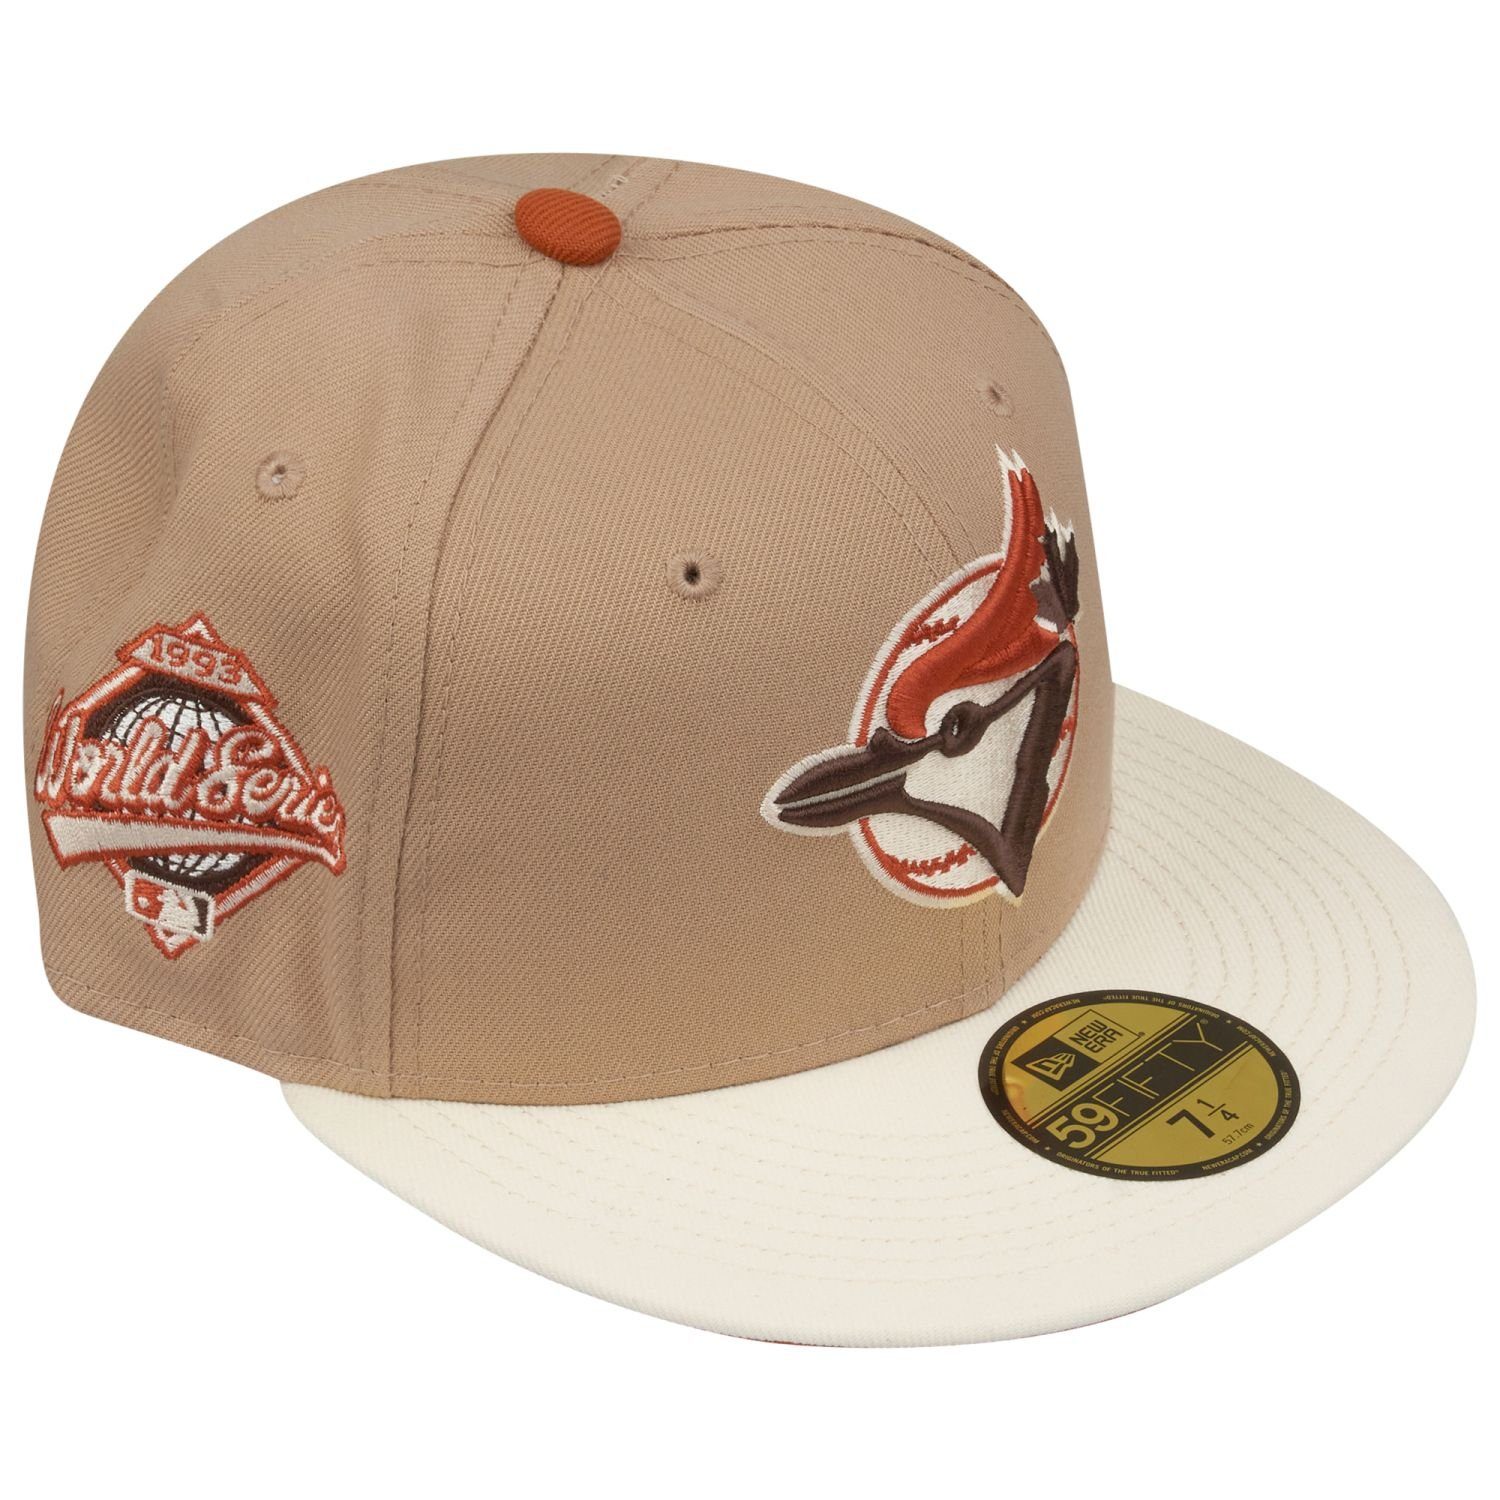 Fitted WORLD Era New SERIES Toronto 59Fifty Jays Cap